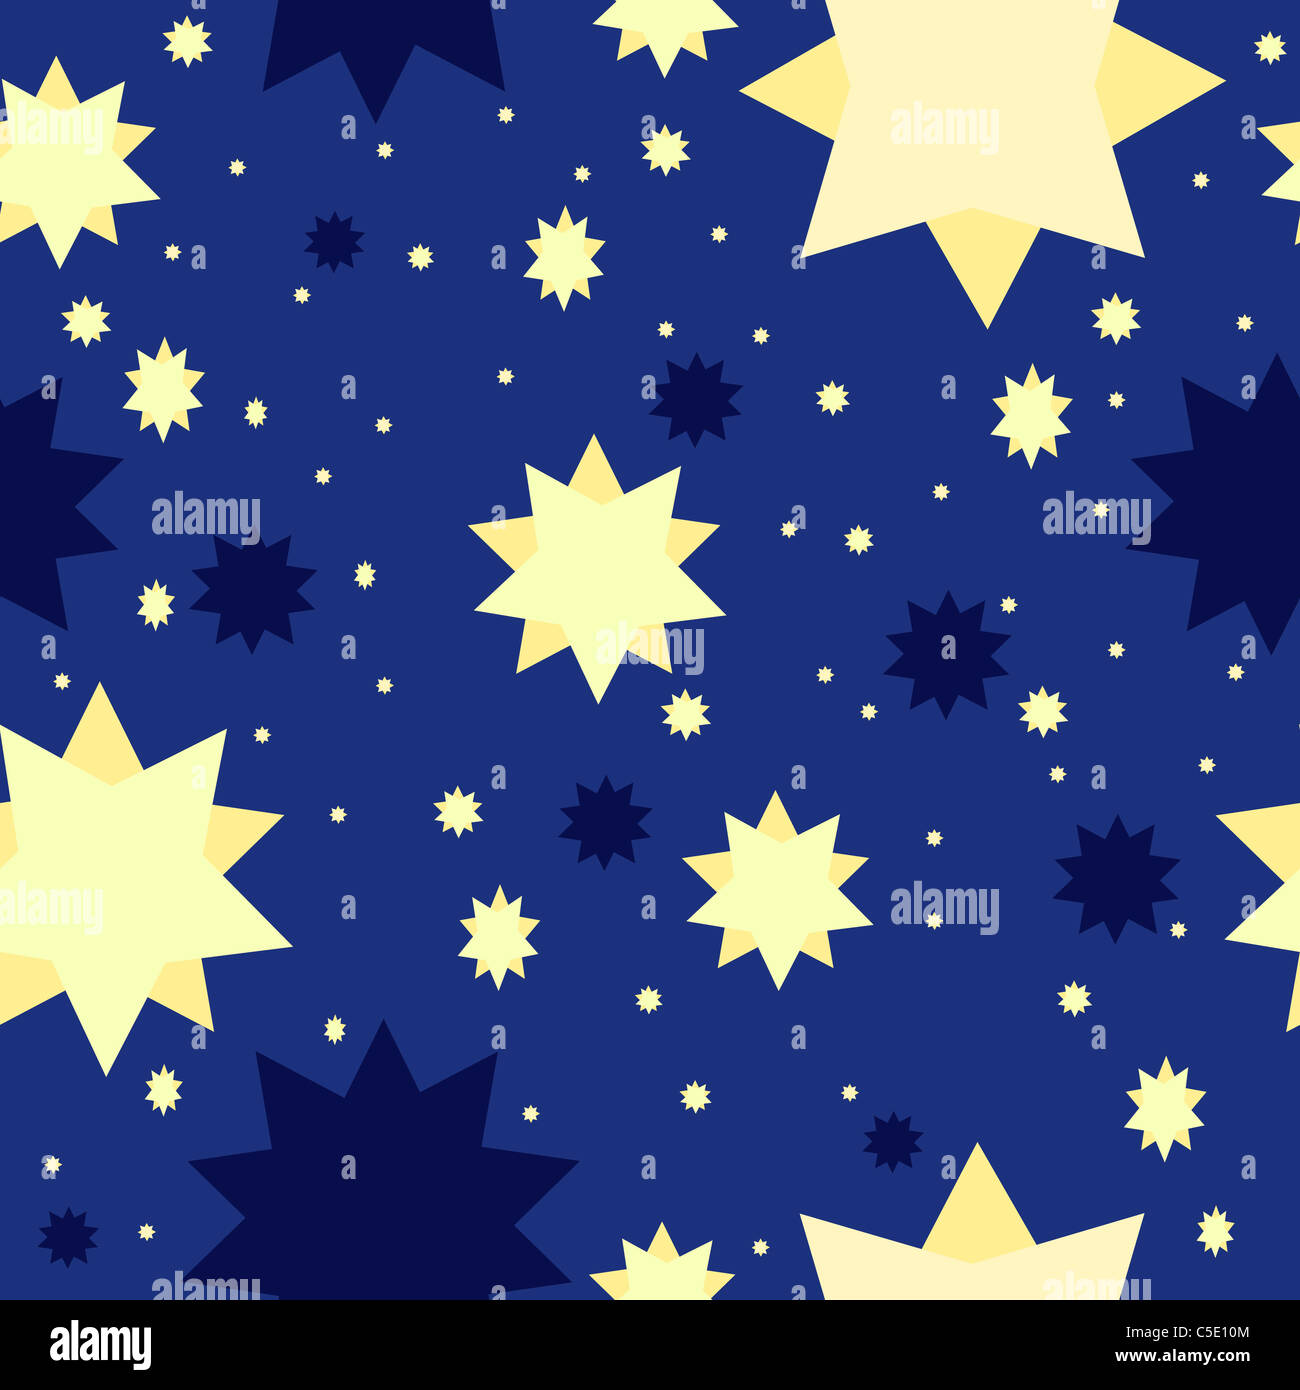 Seamless background with stars and night sky, illustration Stock Photo